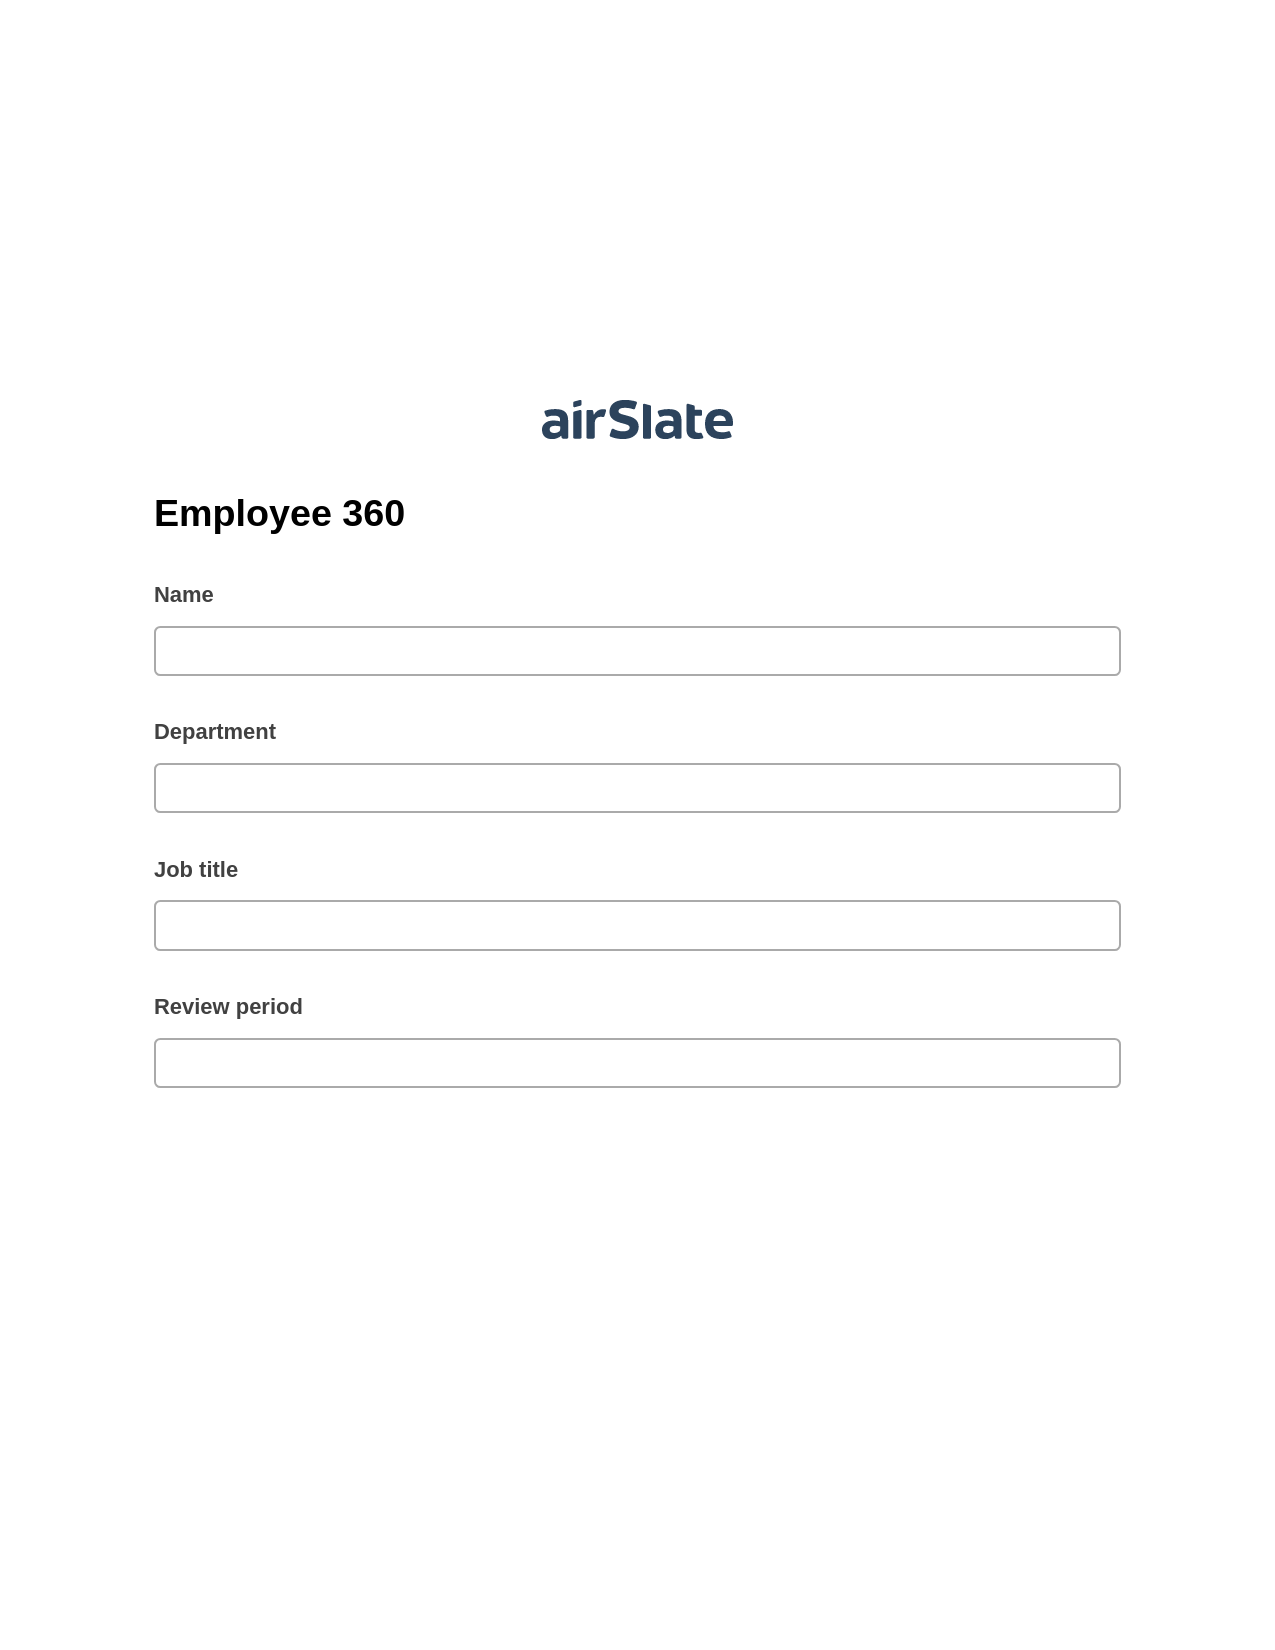 Employee 360 Pre-fill from Salesforce Records with SOQL Bot, Update MS Dynamics 365 Record Bot, Export to Smartsheet